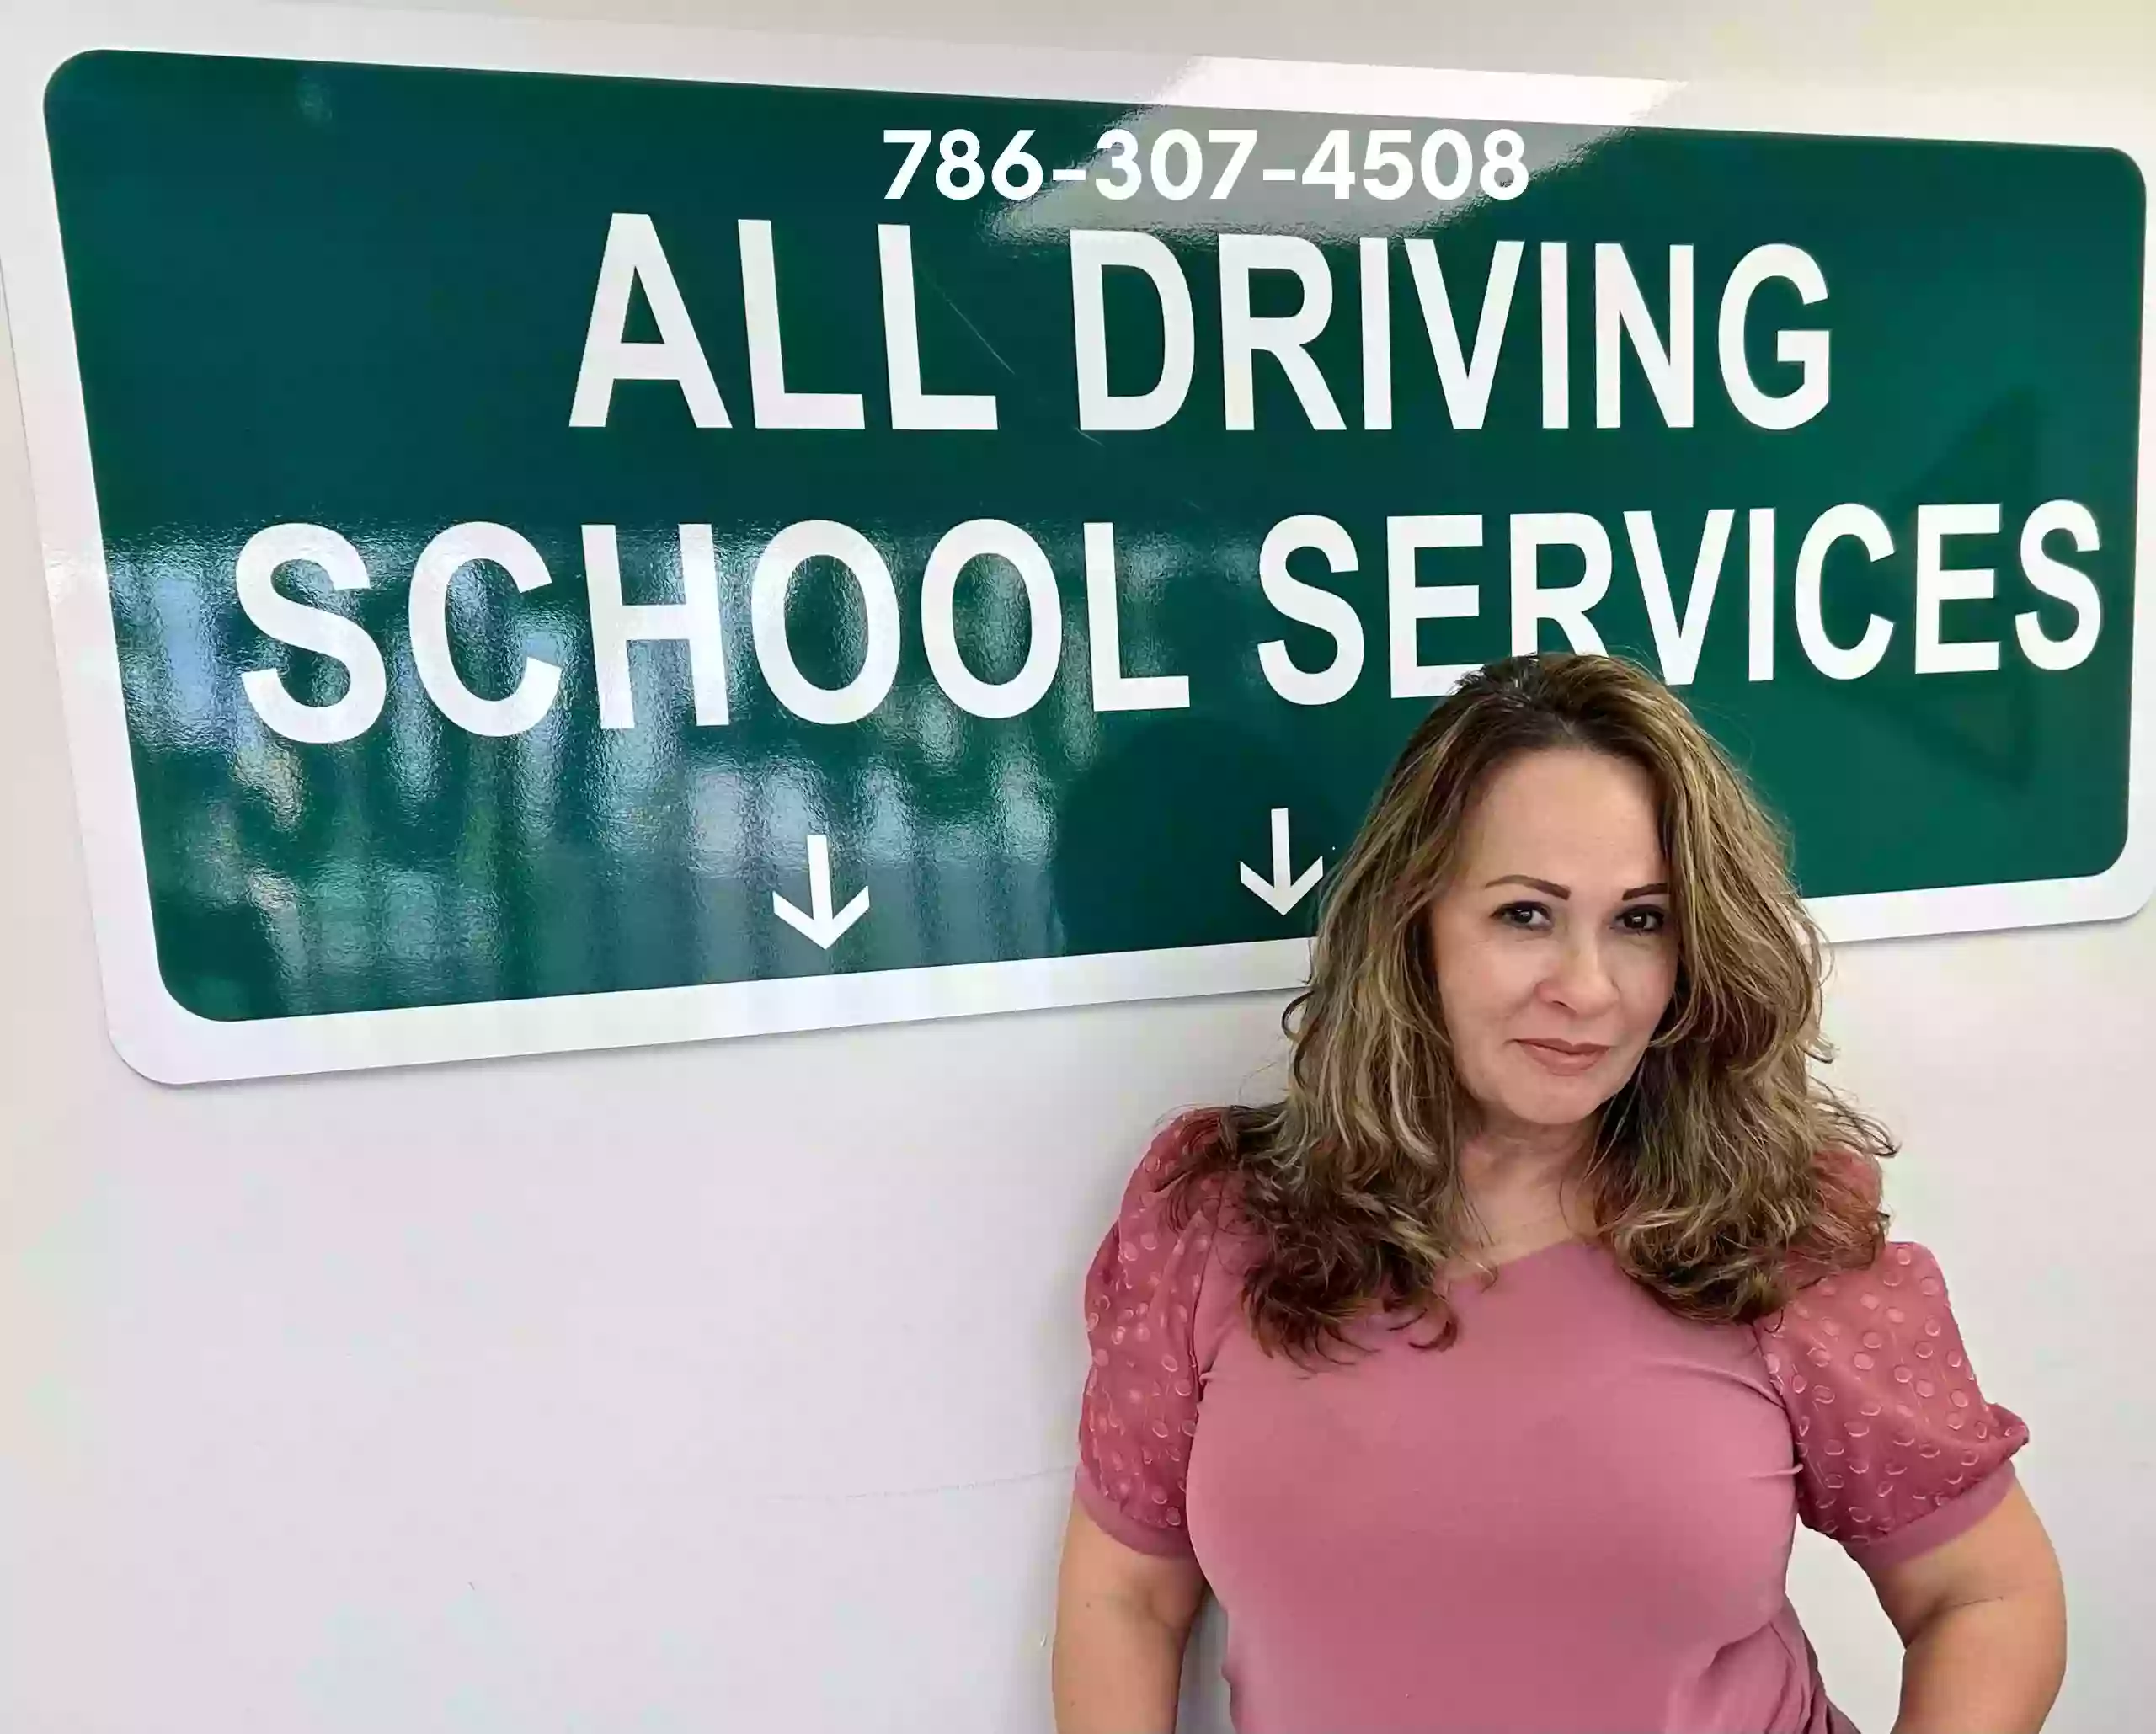 All Driving School Services